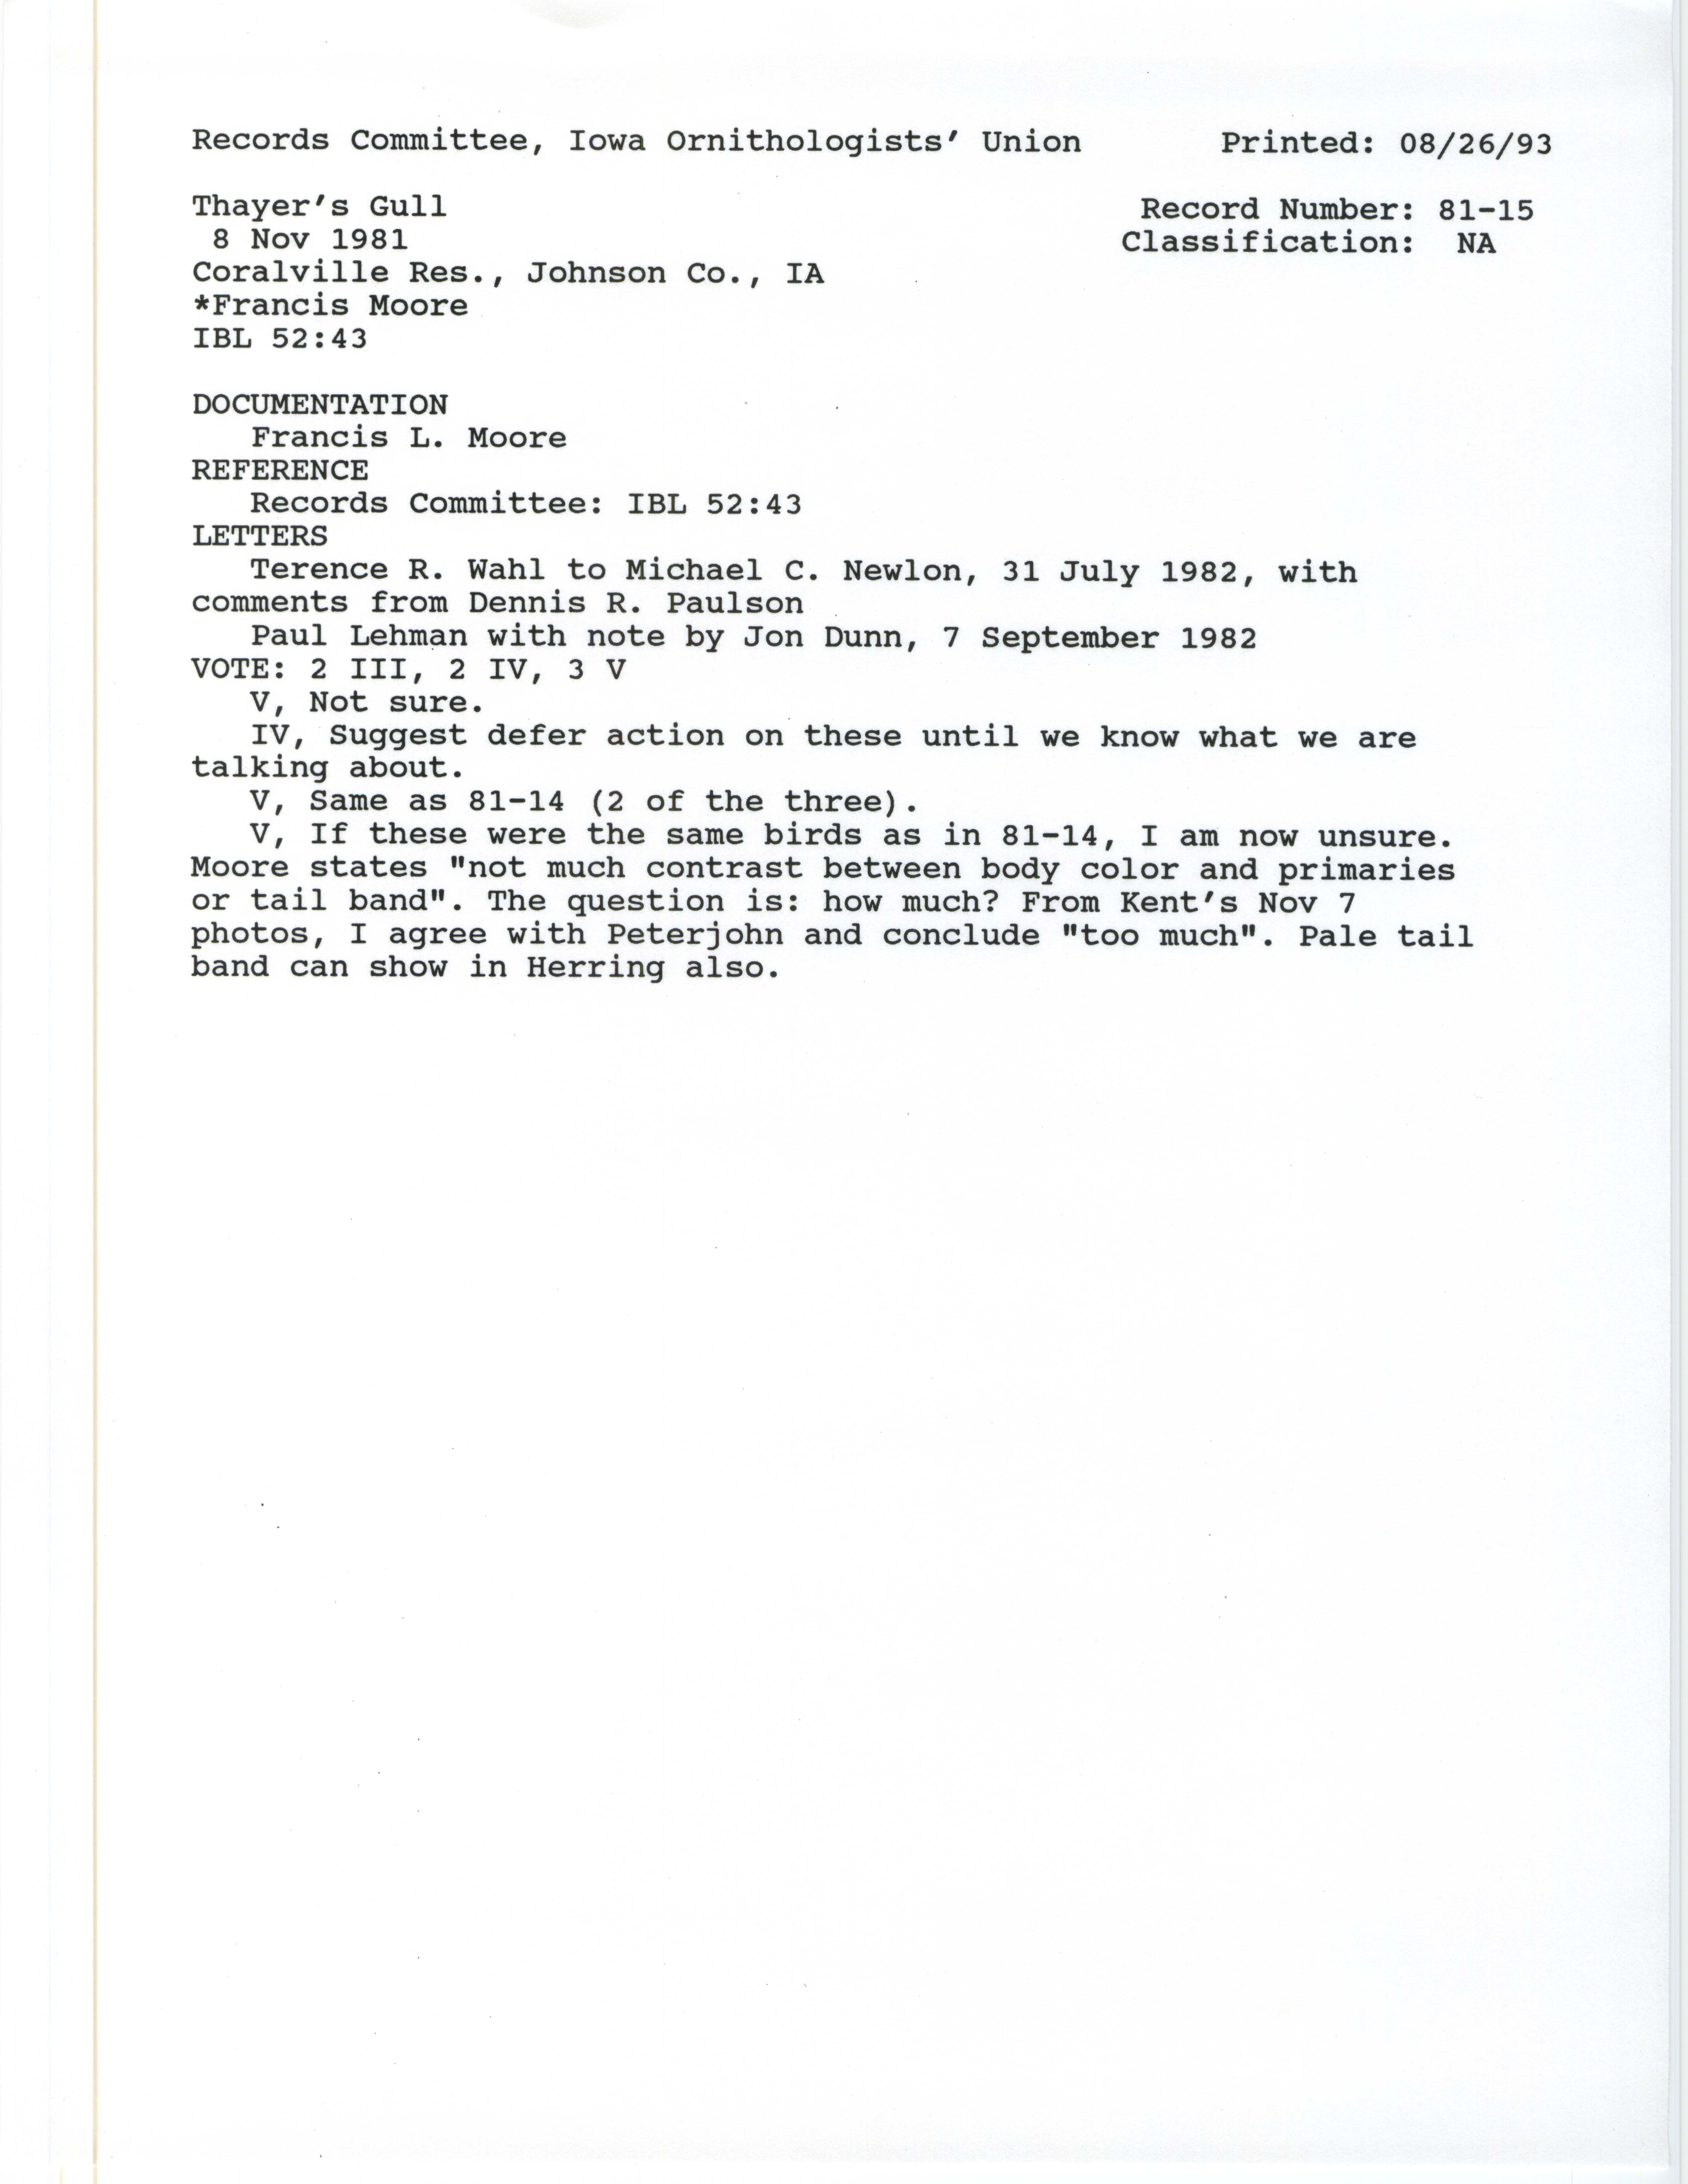 Records Committee review for rare bird sighting of Thayer's Gull at Coralville Dam, 1981